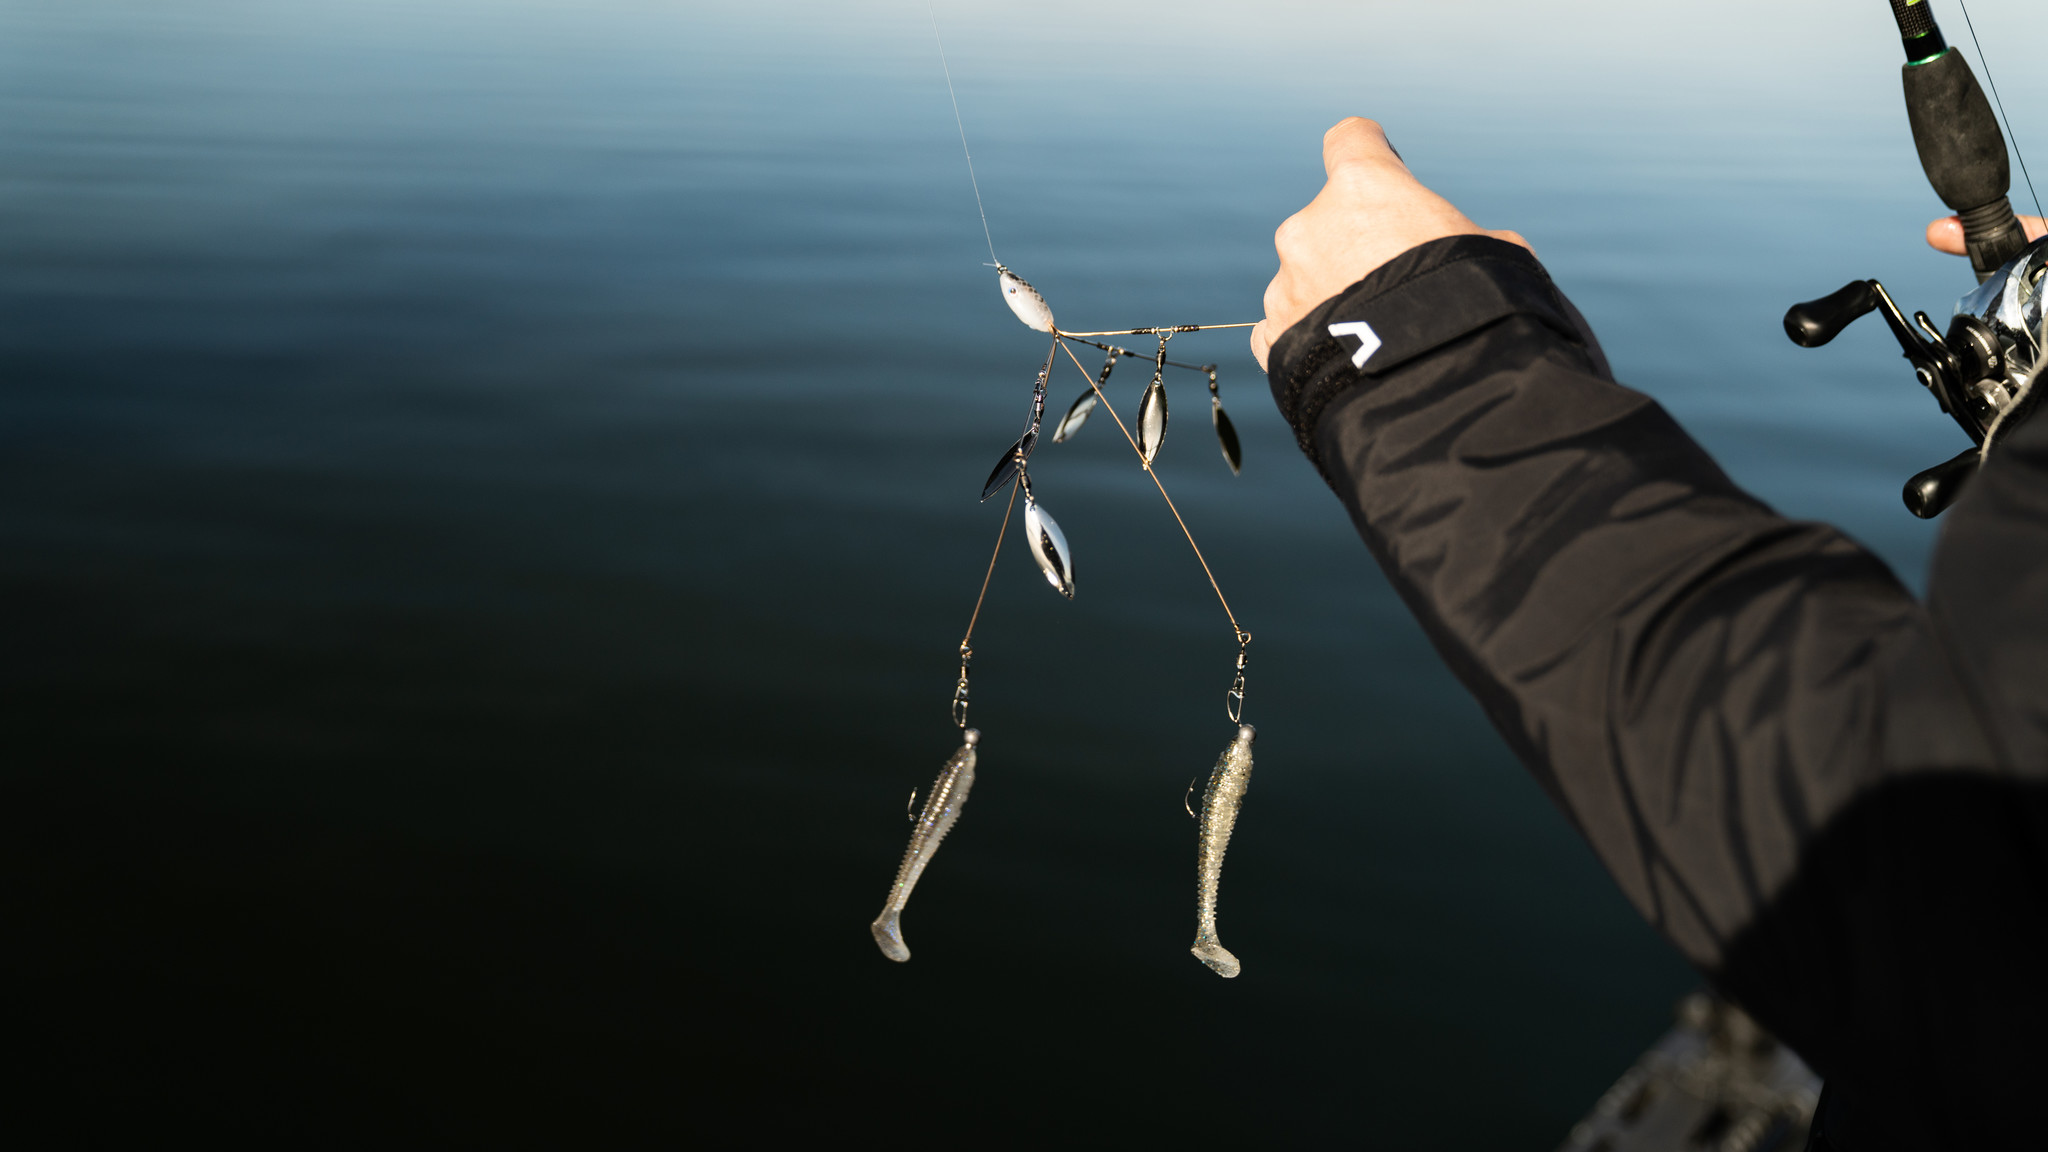 How to Rig Umbrella Rigs  Blades or No Blades - OOW Outdoors